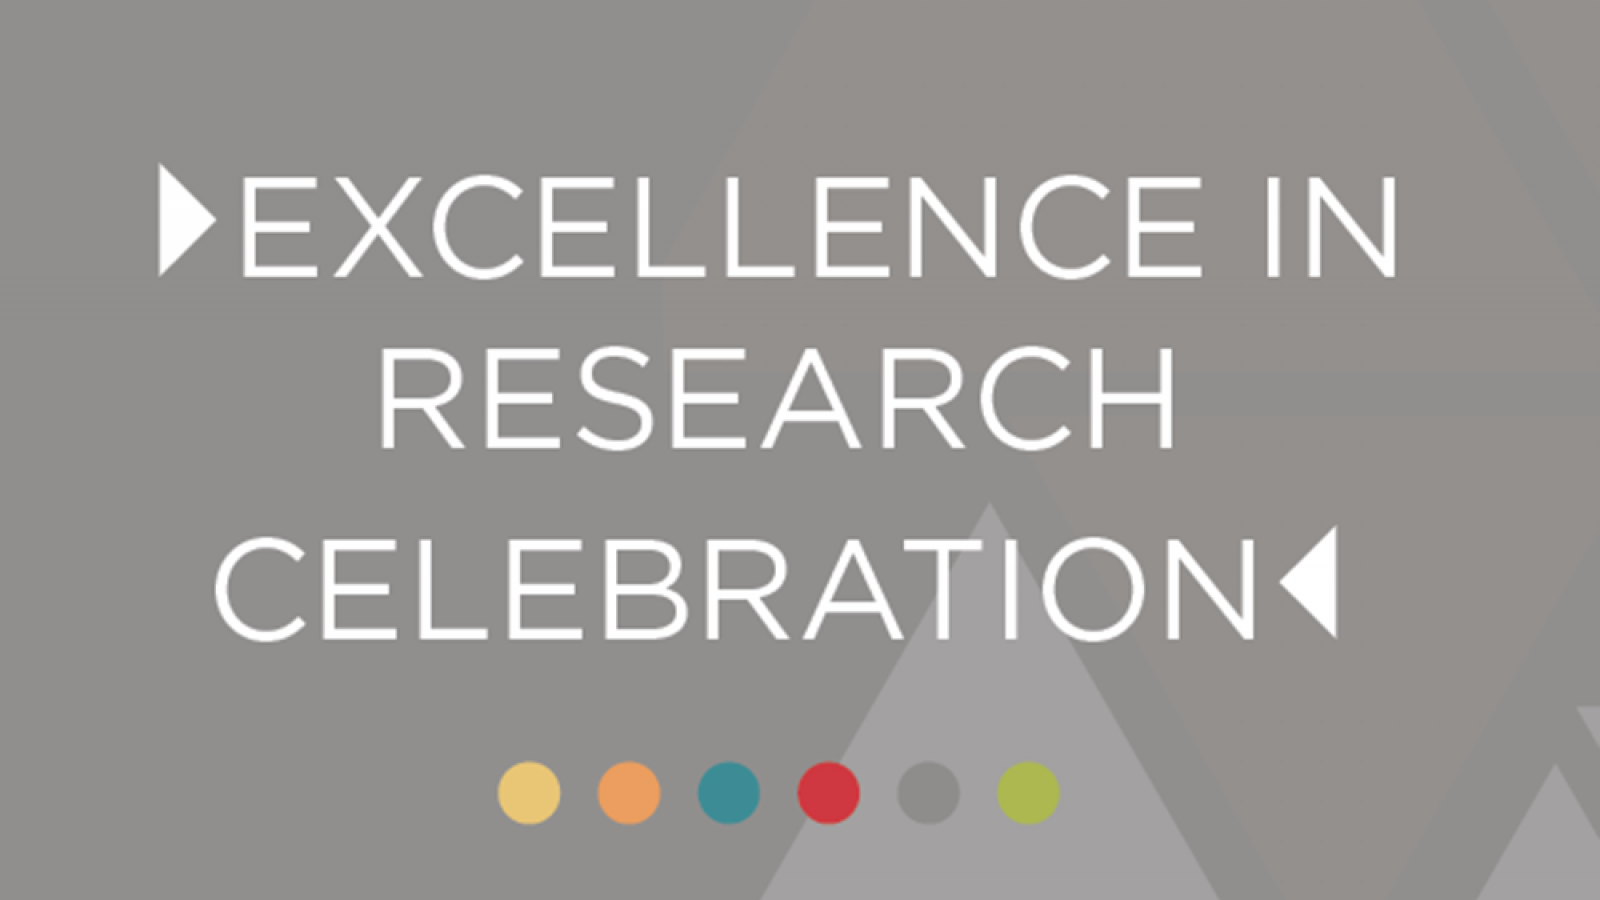 At The 2019 Excellence In Research Celebration, Held - HD Wallpaper 